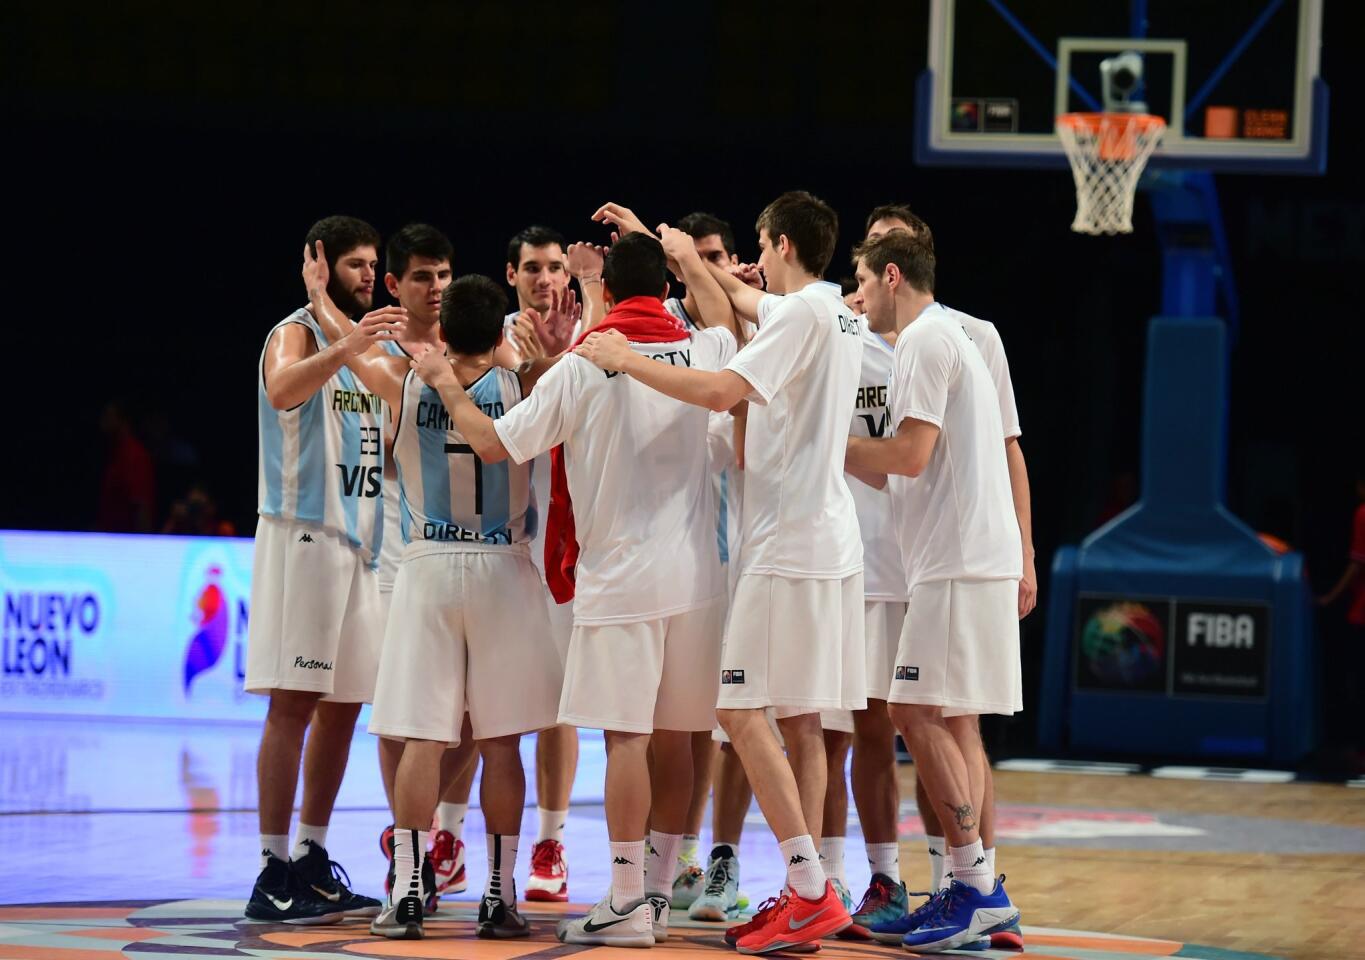 Argentina's players celebrate their victory over Dominican Republic, during a 2015 FIBA Americas Championship Men's Olympic qualifying match at the Sport Palace in Mexico City on September 8, 2015. AFP PHOTO/RONALDO SCHEMIDTRONALDO SCHEMIDT/AFP/Getty Images ** OUTS - ELSENT, FPG - OUTS * NM, PH, VA if sourced by CT, LA or MoD **